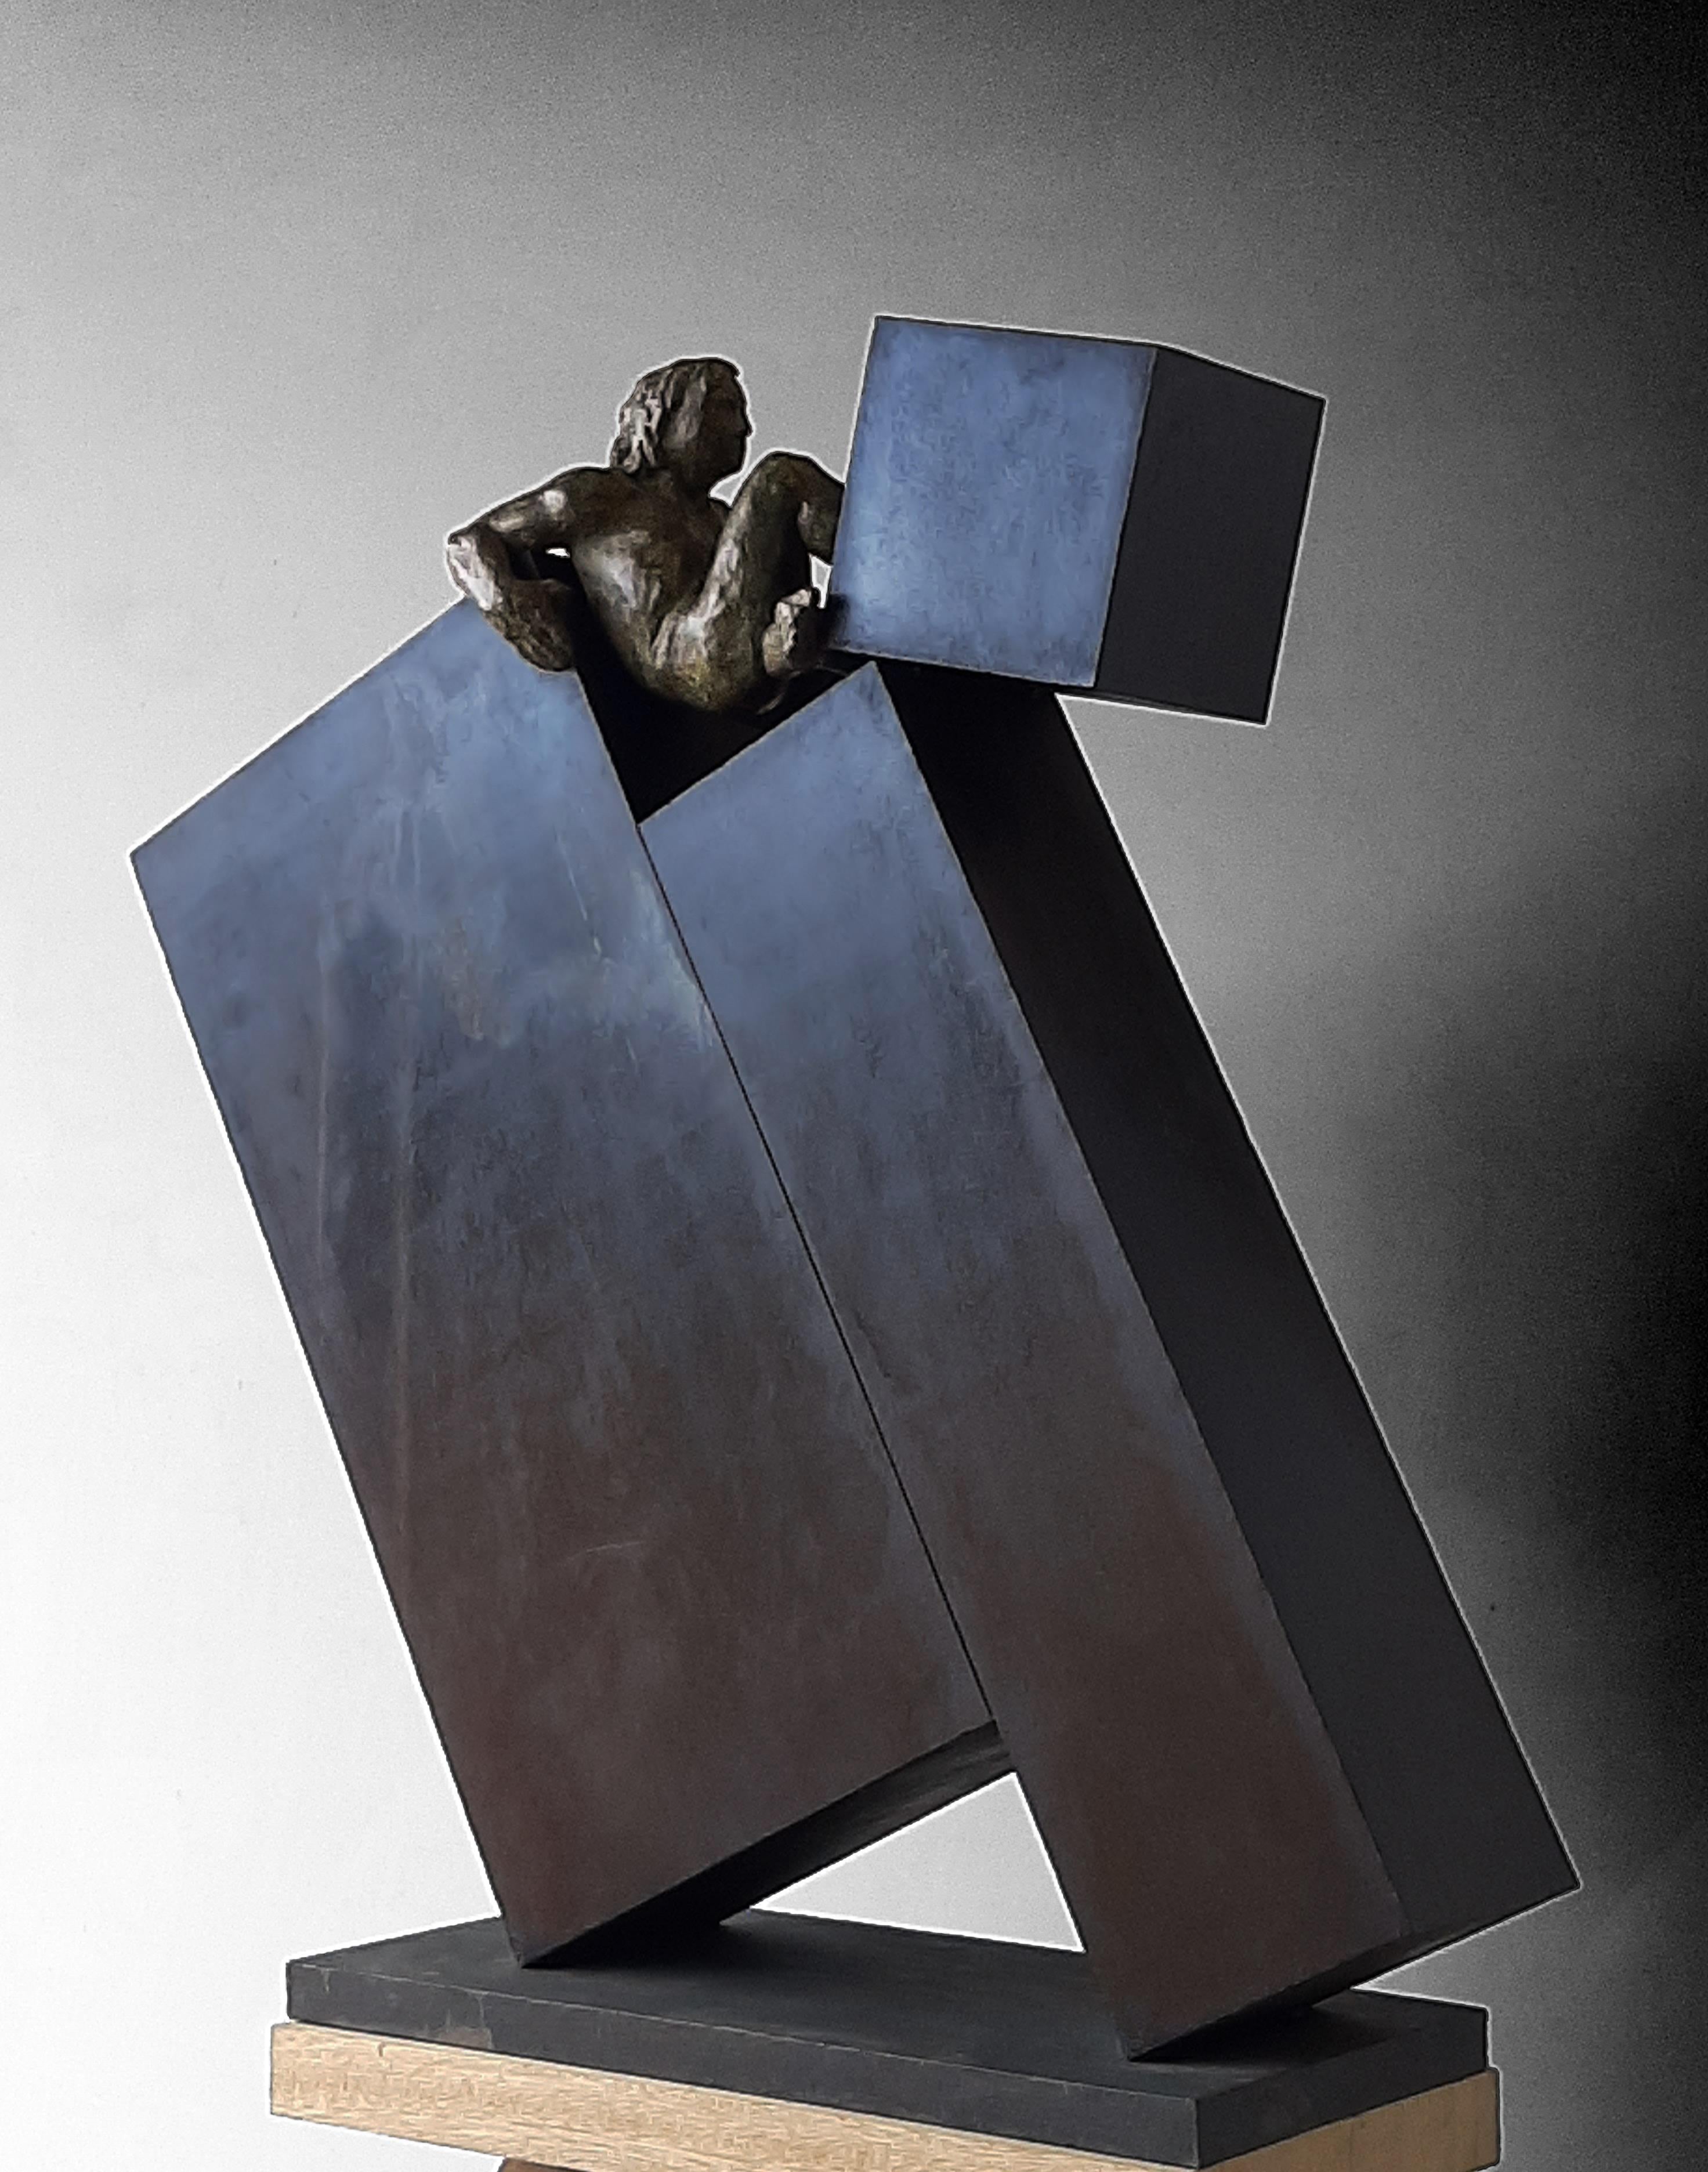 Sculpture by the Spanish artist AMANCIO GONZALEZ
Artist well known for his large format works on the street.
Iron and bronze. 7 copies
AMANCIO Gonzalez ( Leon 1965 )

Amancio González is a sculptor from Leon and an internationally celebrated